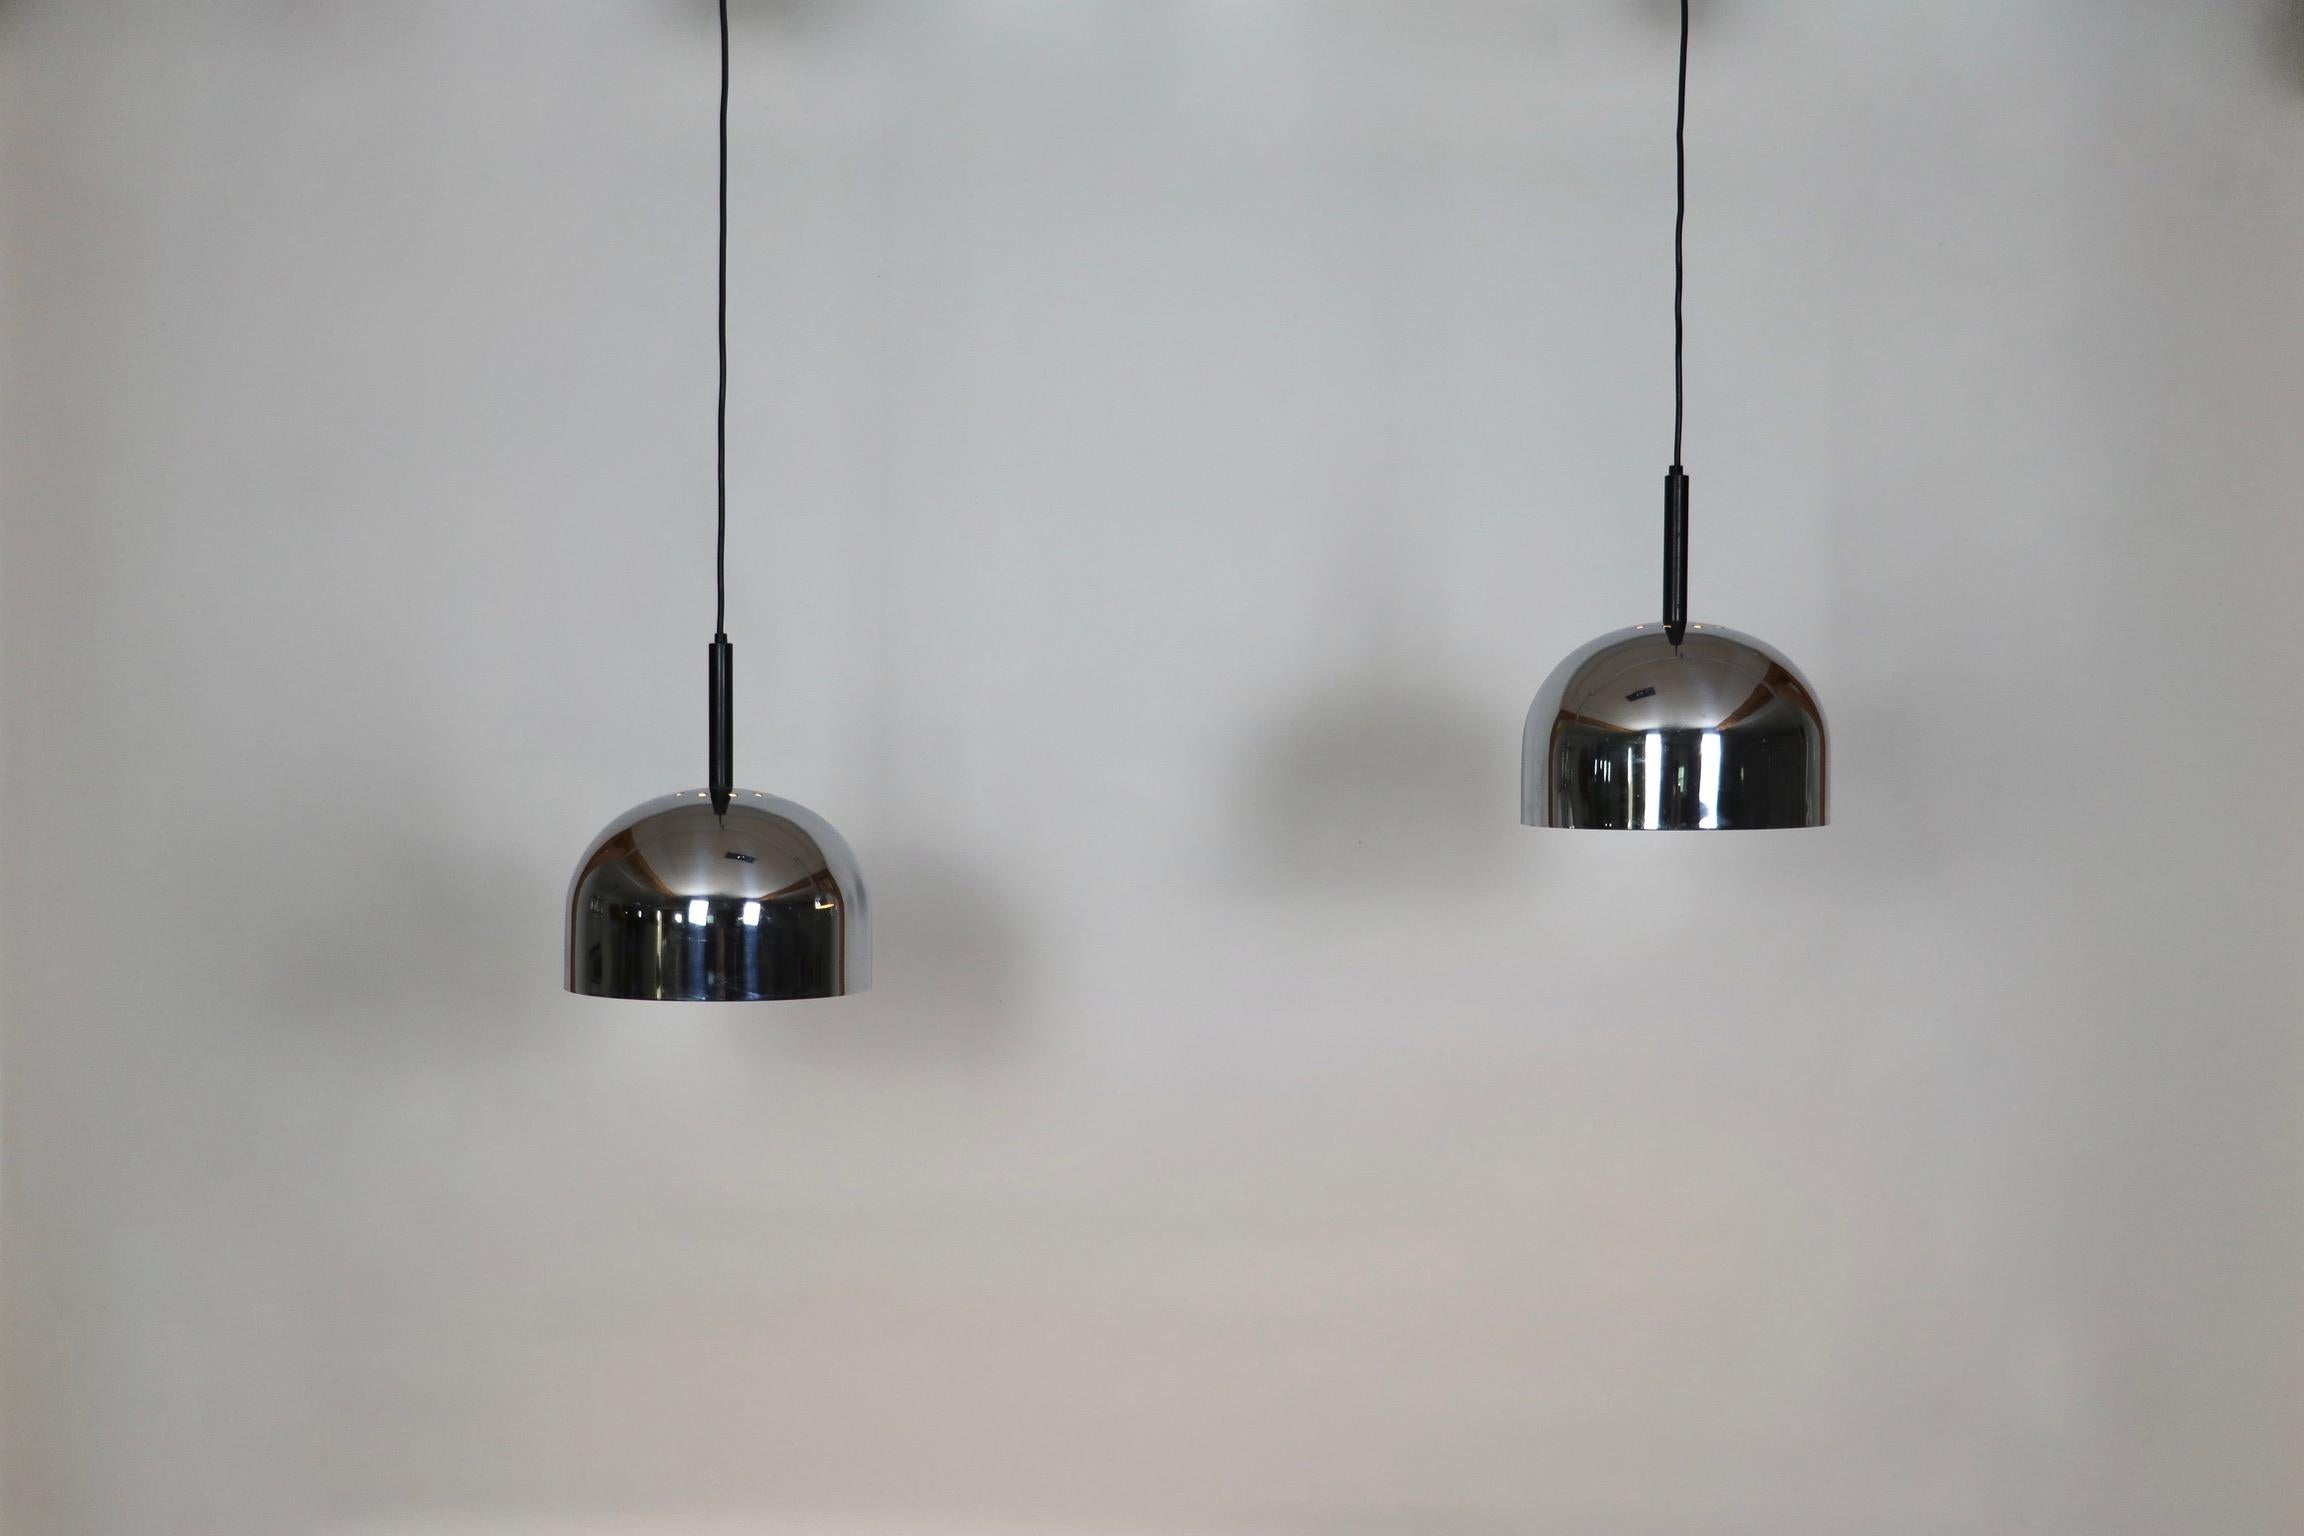 Nice pair of chromed metal pendant lamps, designed by Gal Aulenti and Livio Castiglioni for Stilnovo, Italy 1960s.
A timeless masterpiece of design collaboration between the renowned talents of Gae Aulenti and Livio Castiglioni, brought to life by